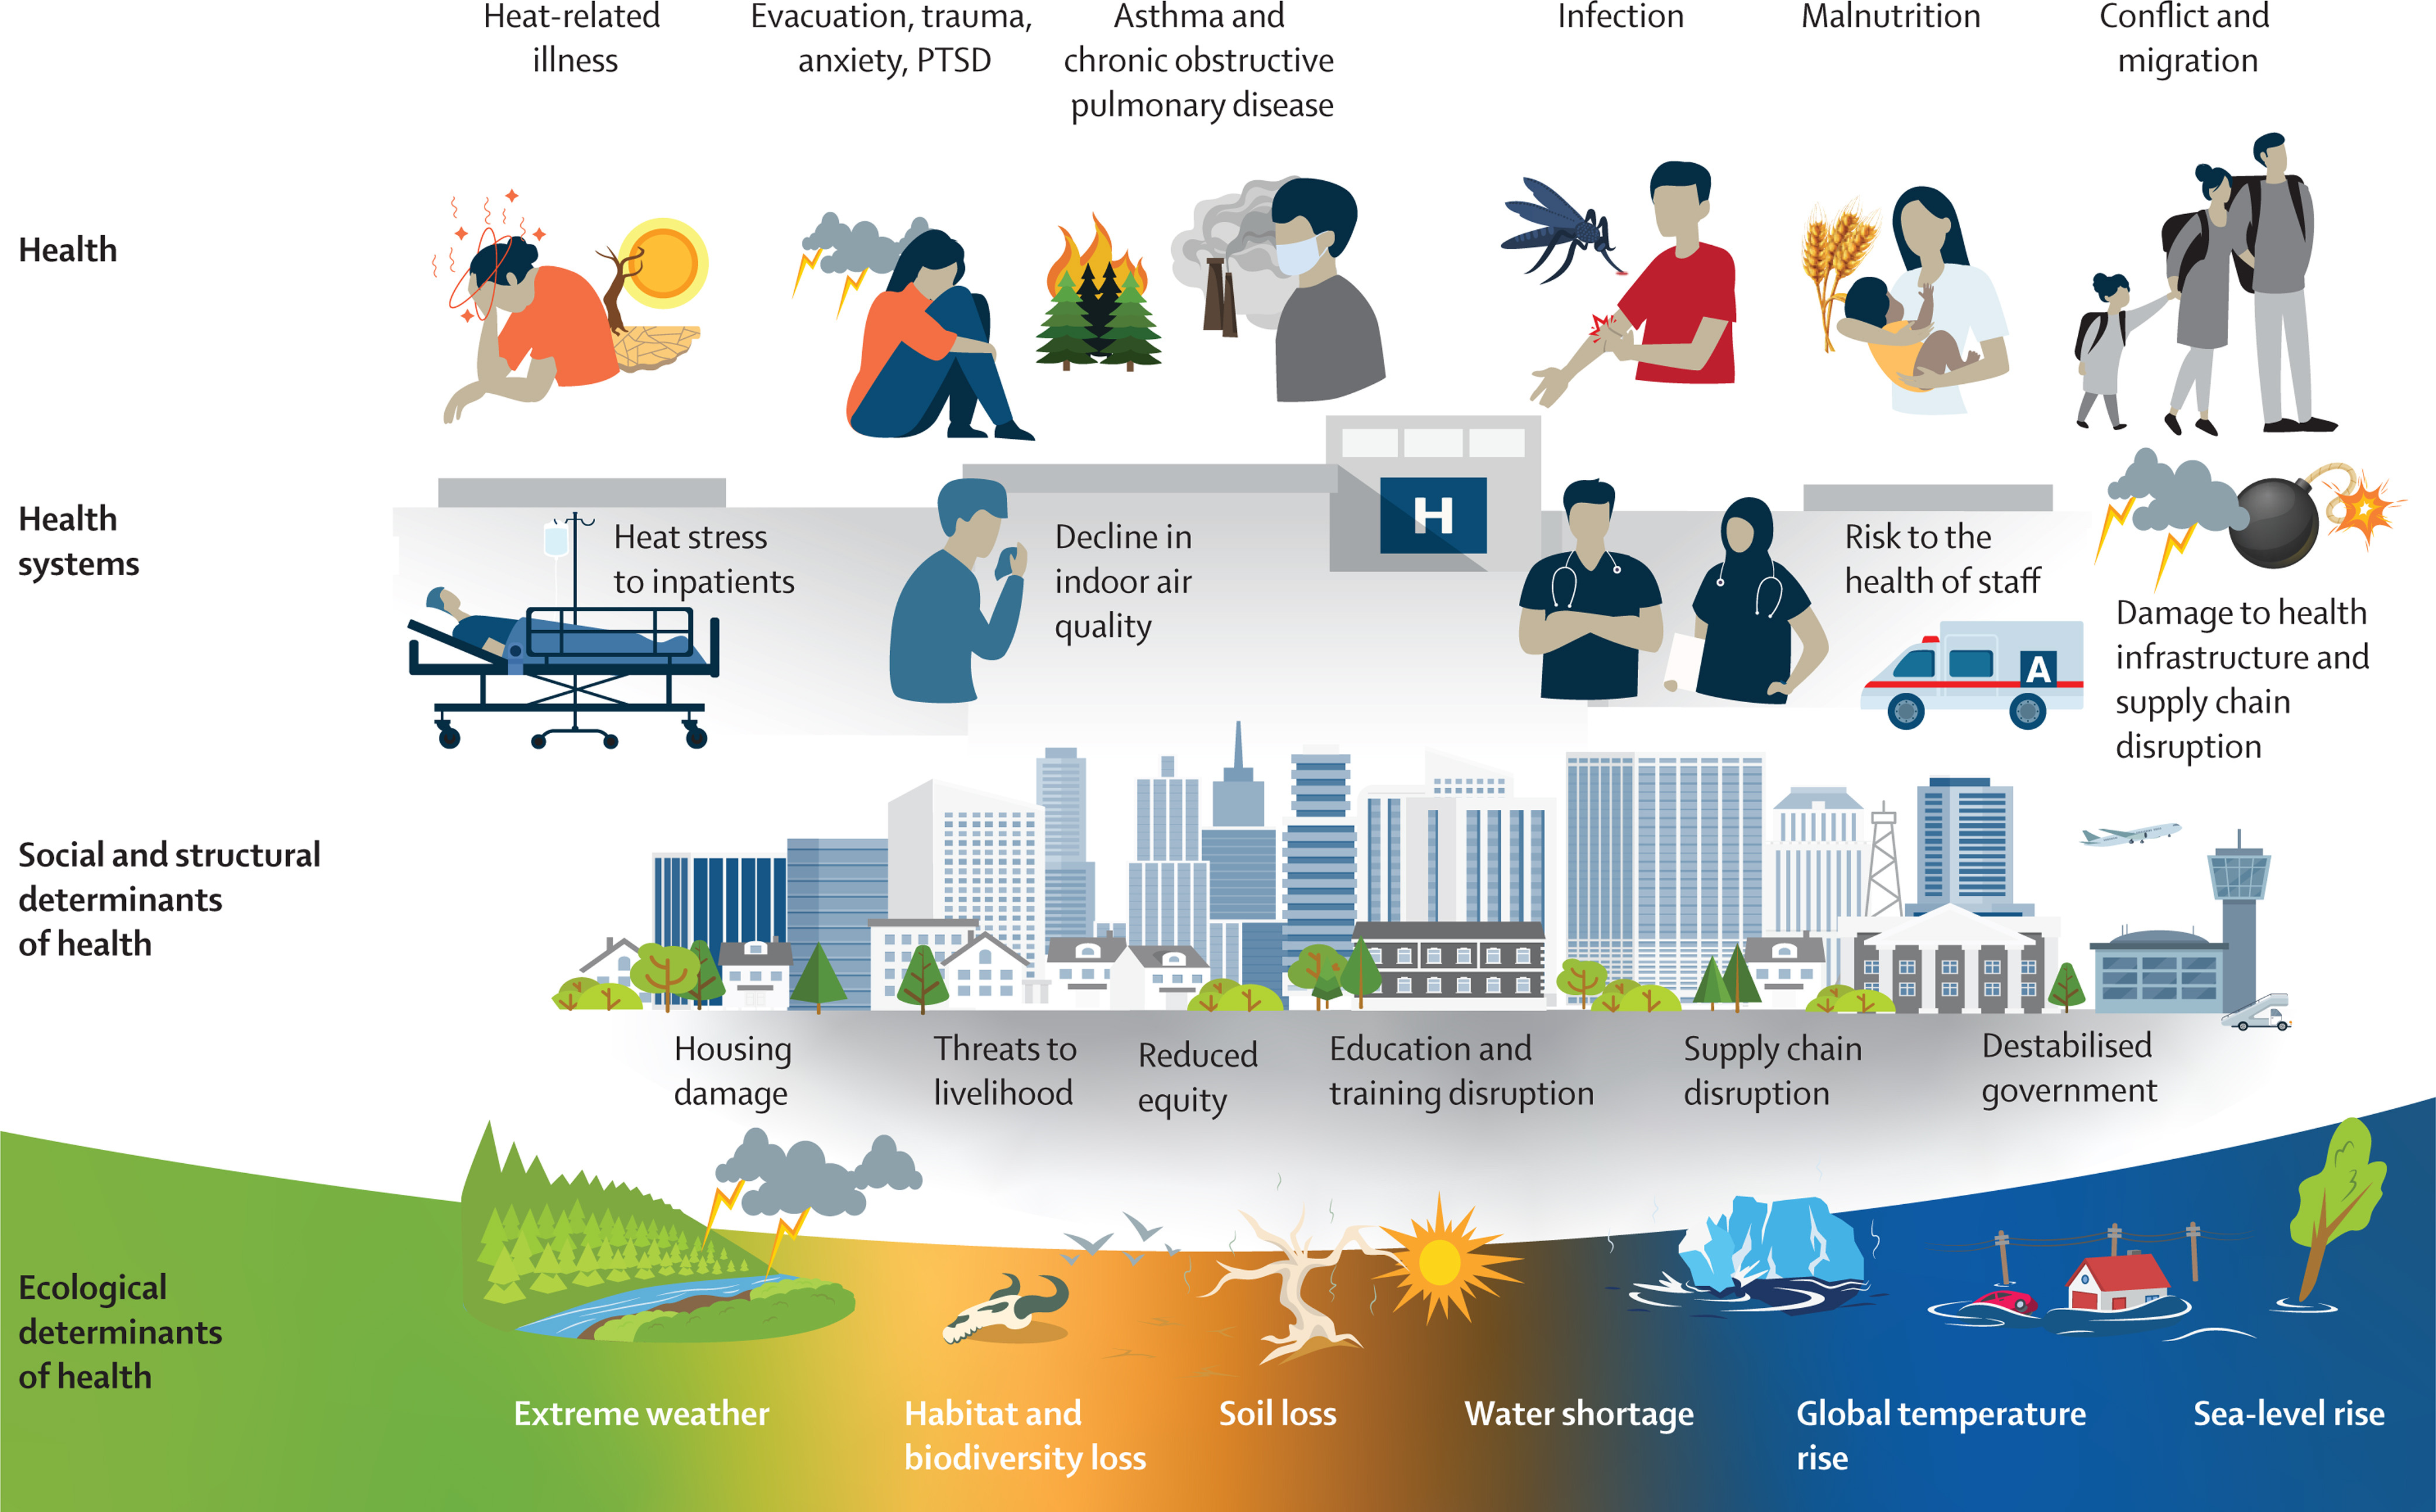 Climate change-related impacts on health and health systems